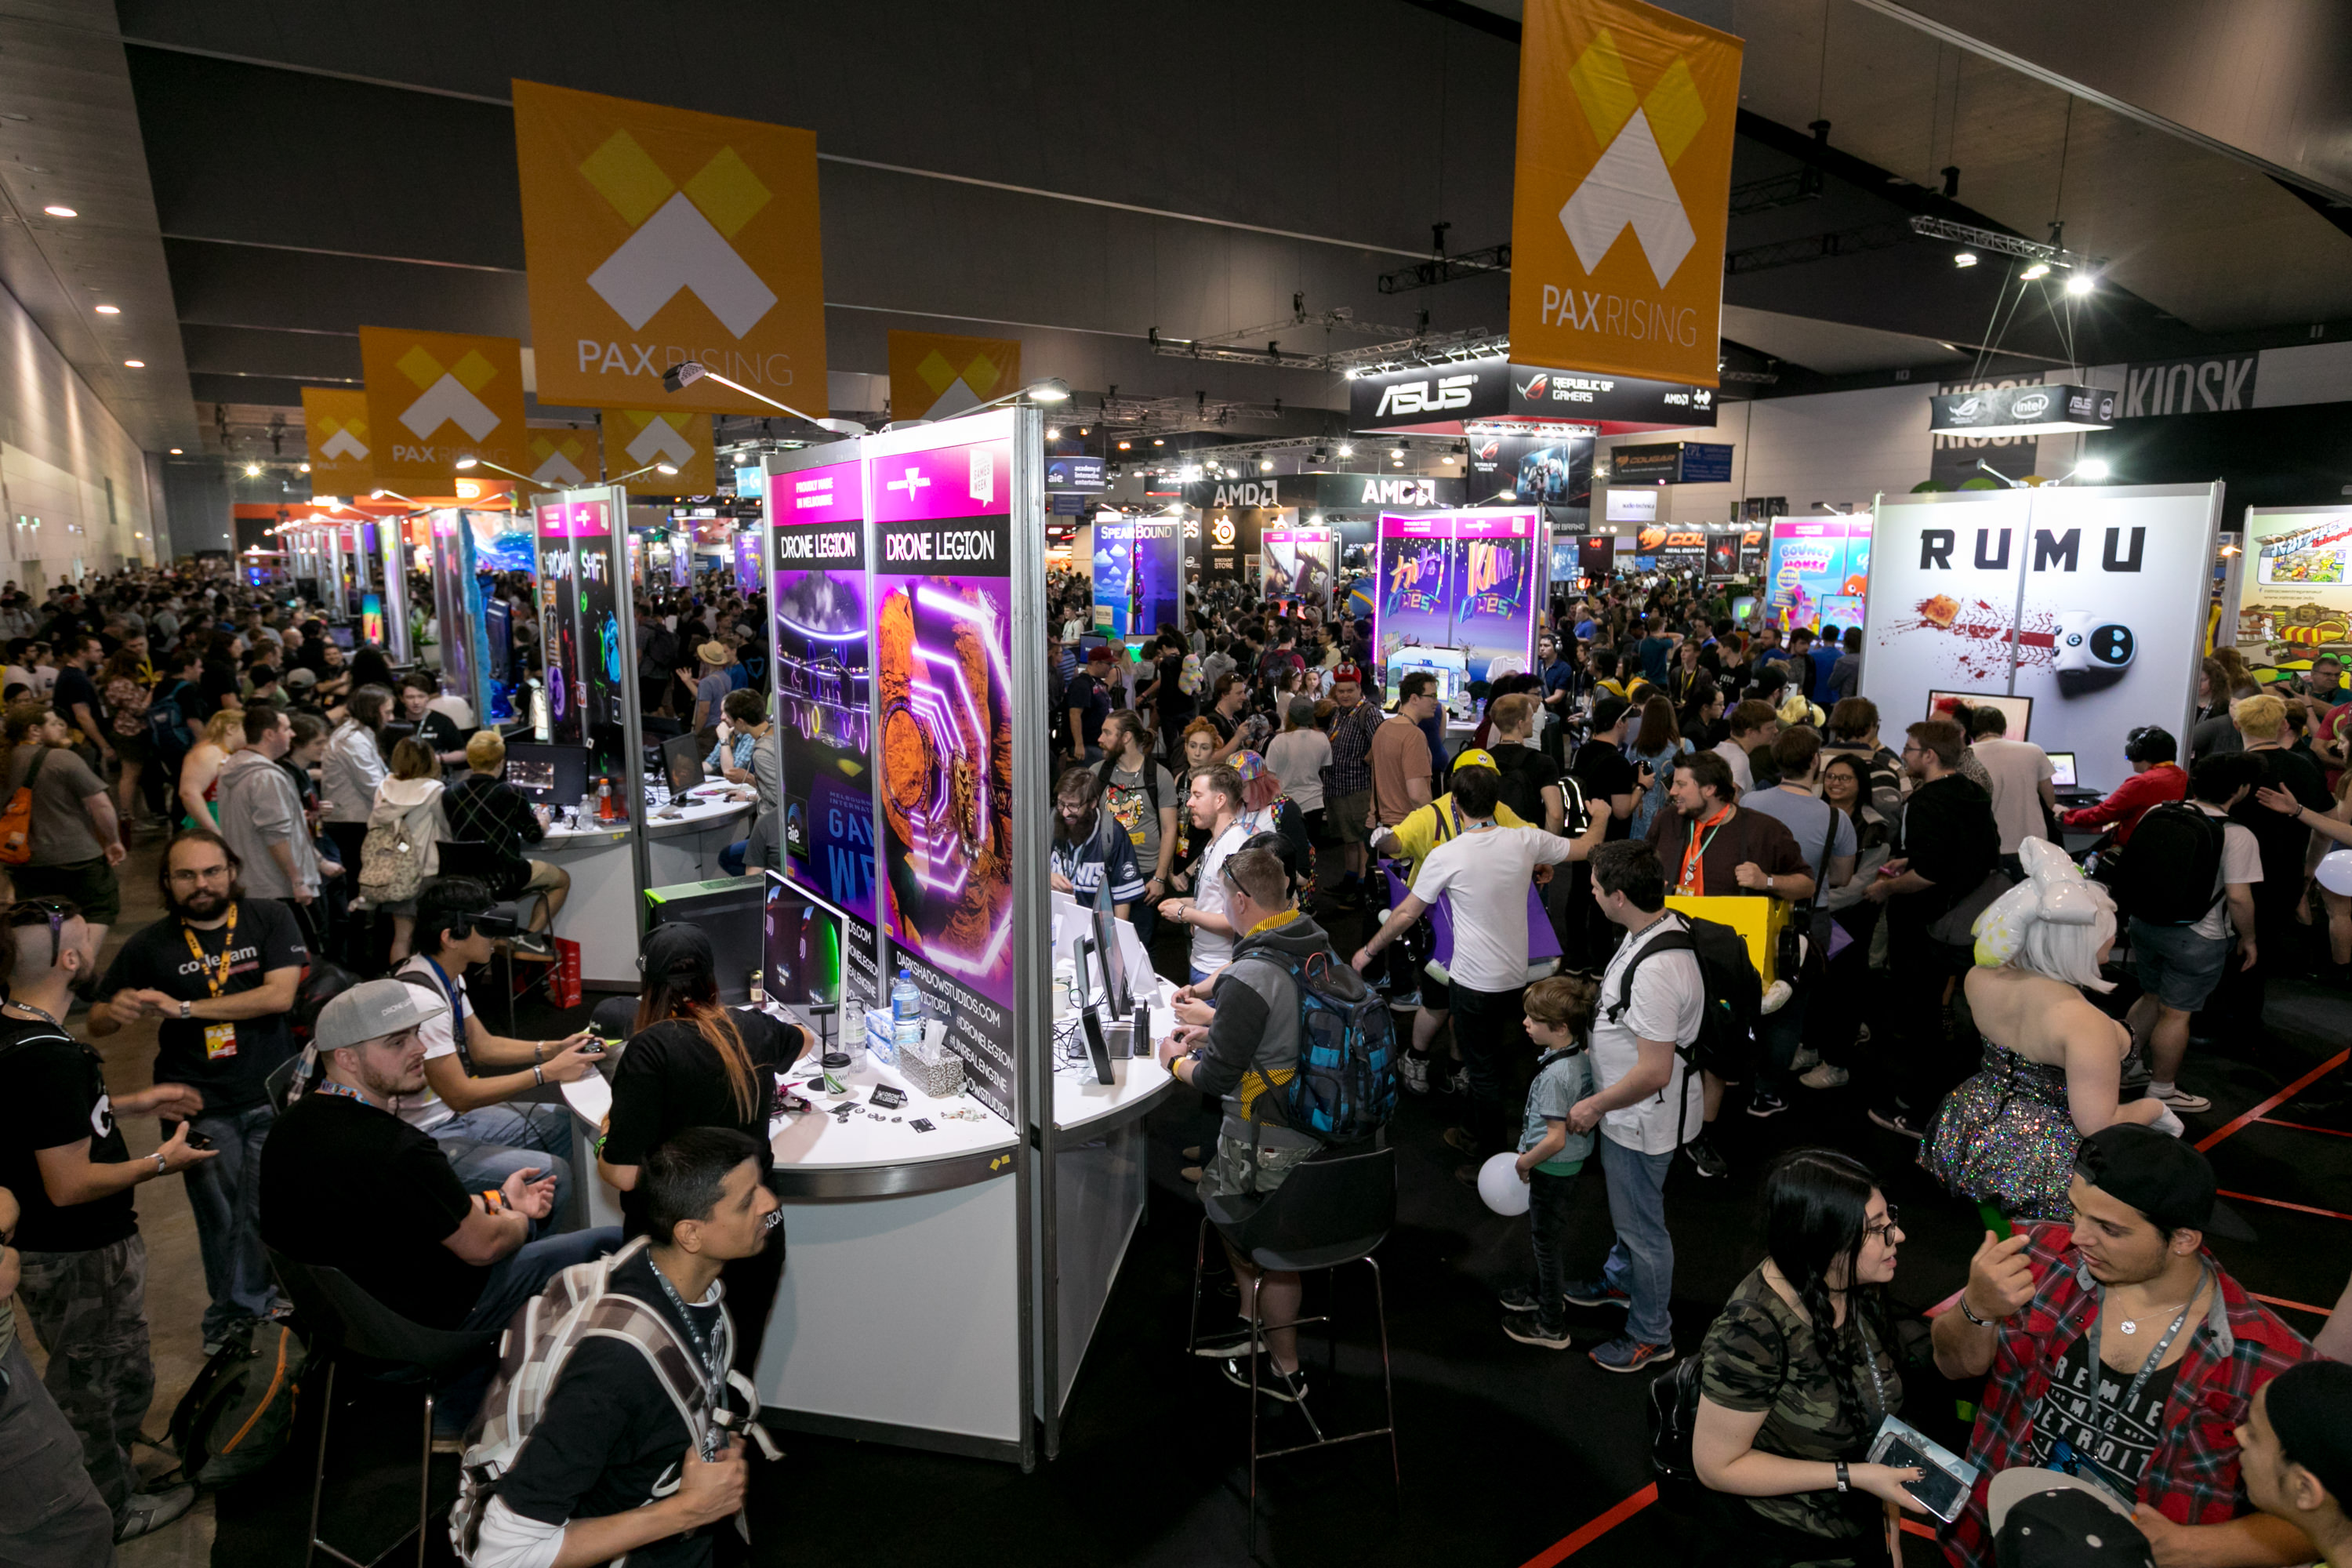  After two years of cancelations, PAX Australia is trying again in 2022 